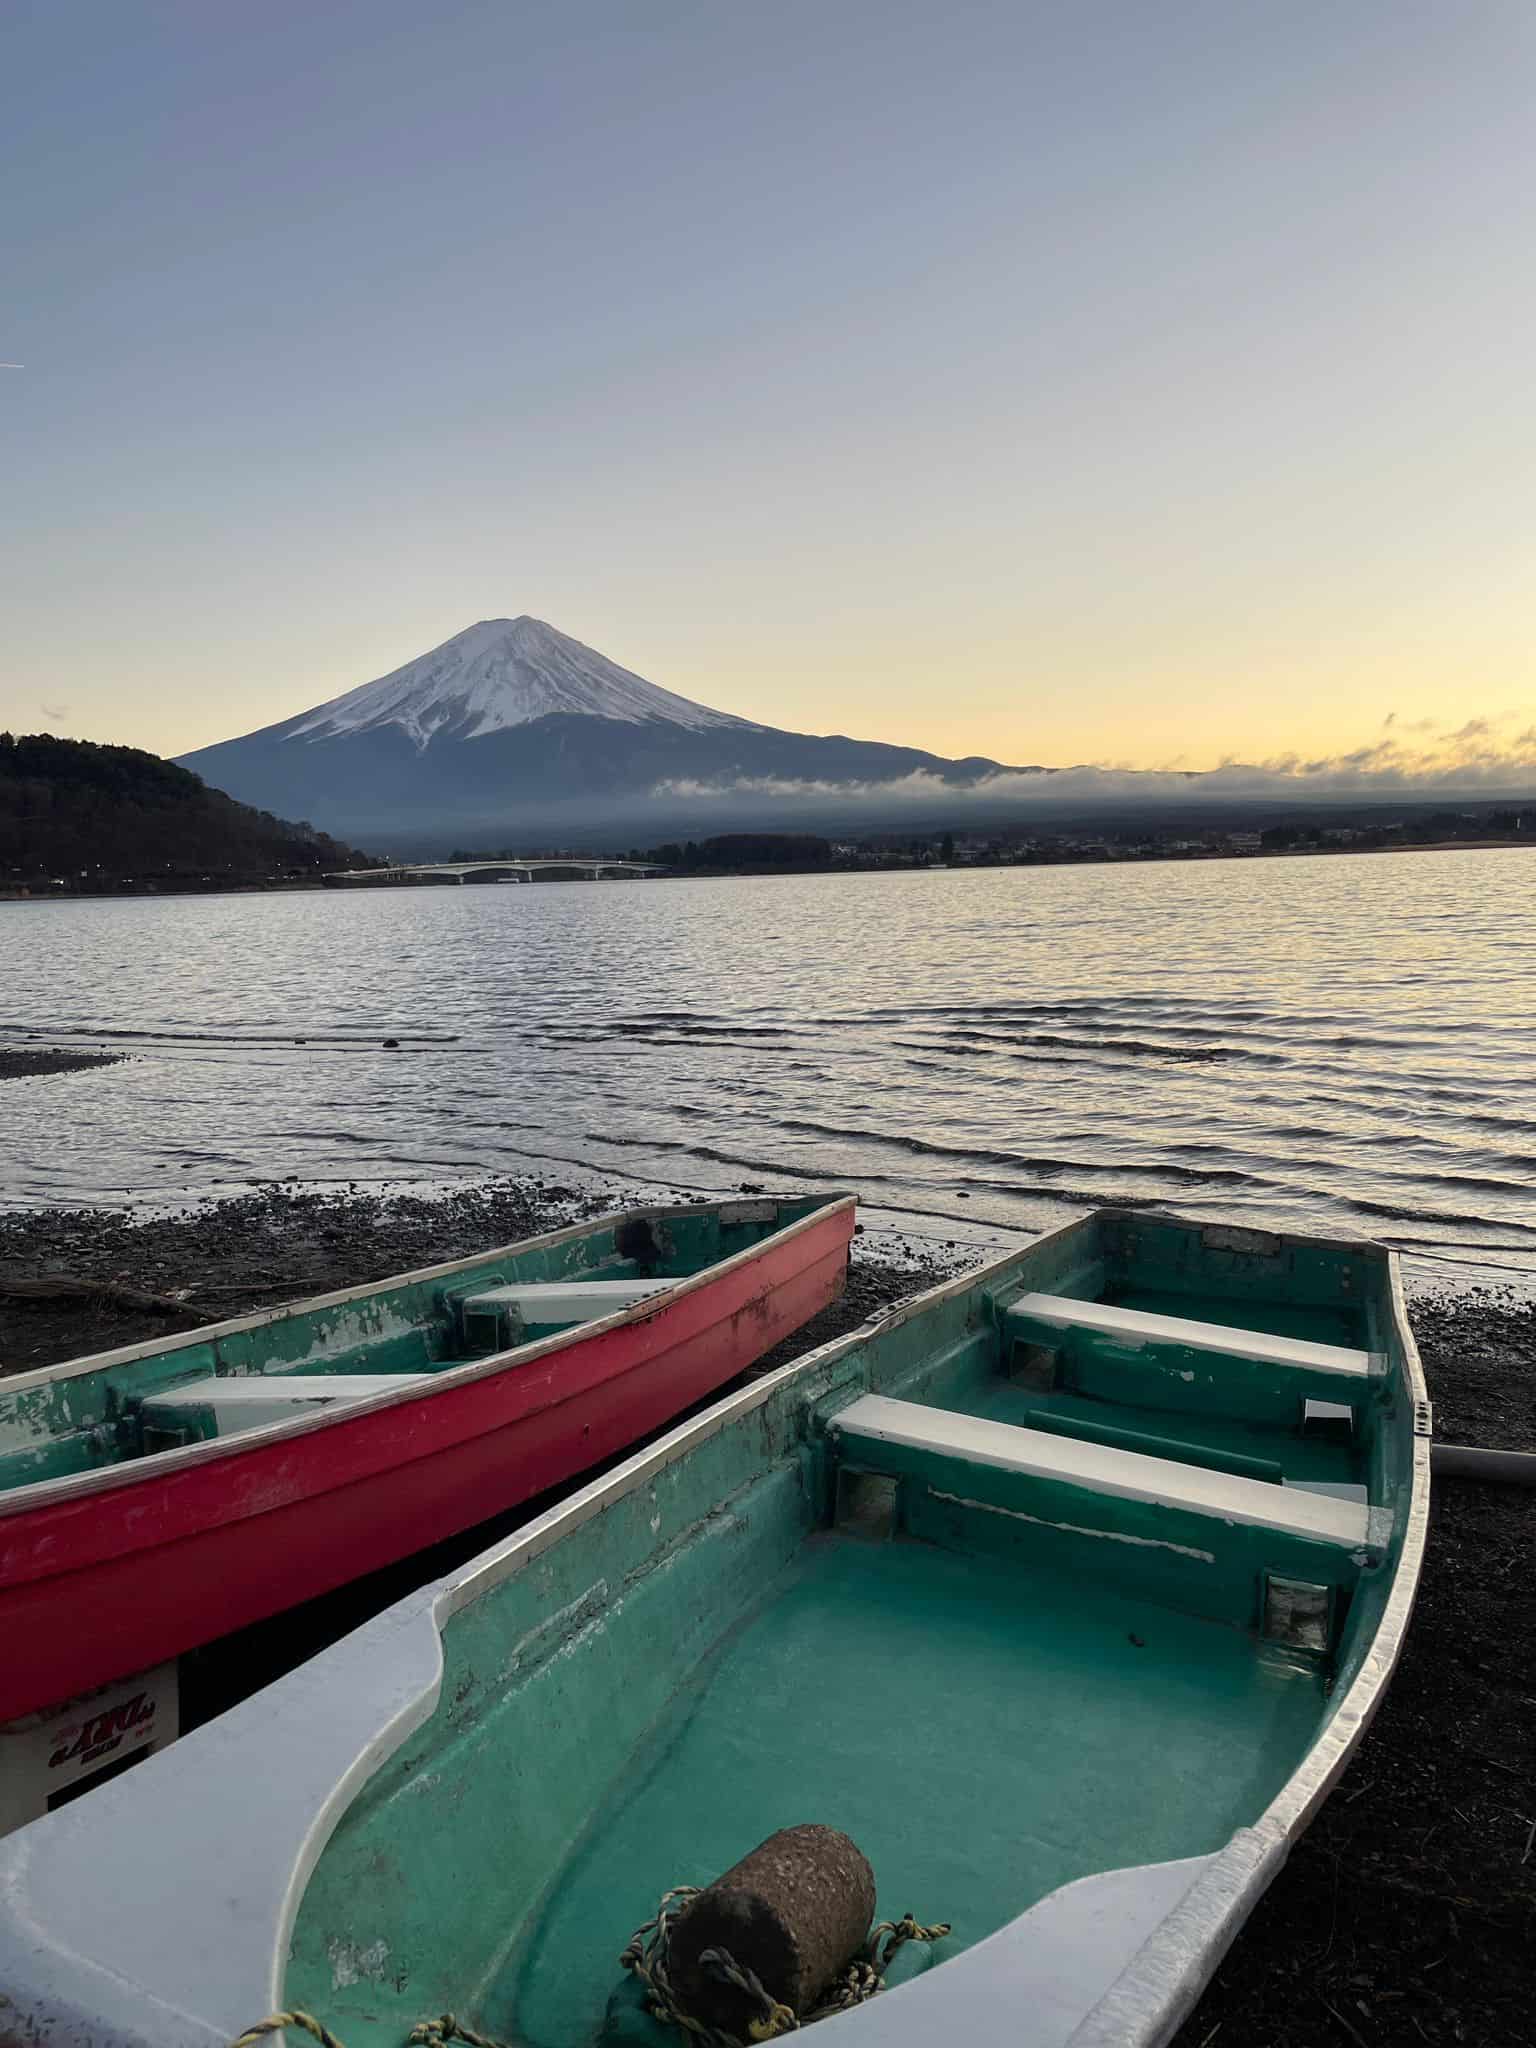 Mount Fuji at sunset with a couple of boats in the foreground and a lake separating them from the volcano